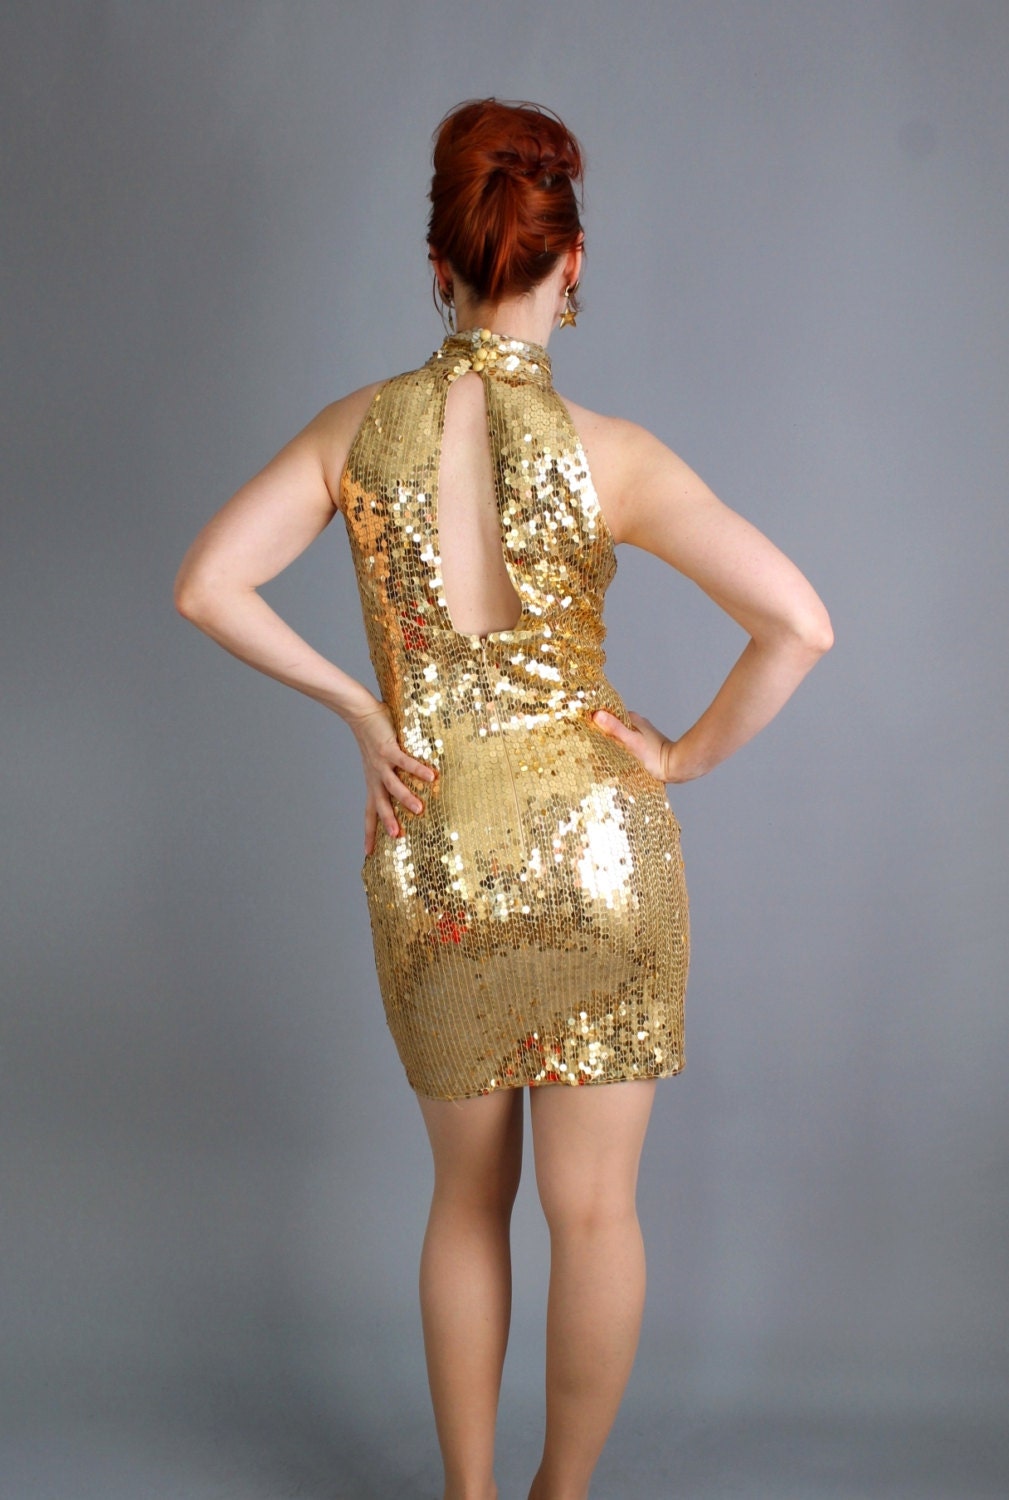 Sexy Hollywood Glam Gold Sequined Cocktail Party Dress. Wiggle Dress. Retro 60s. Prom Dress